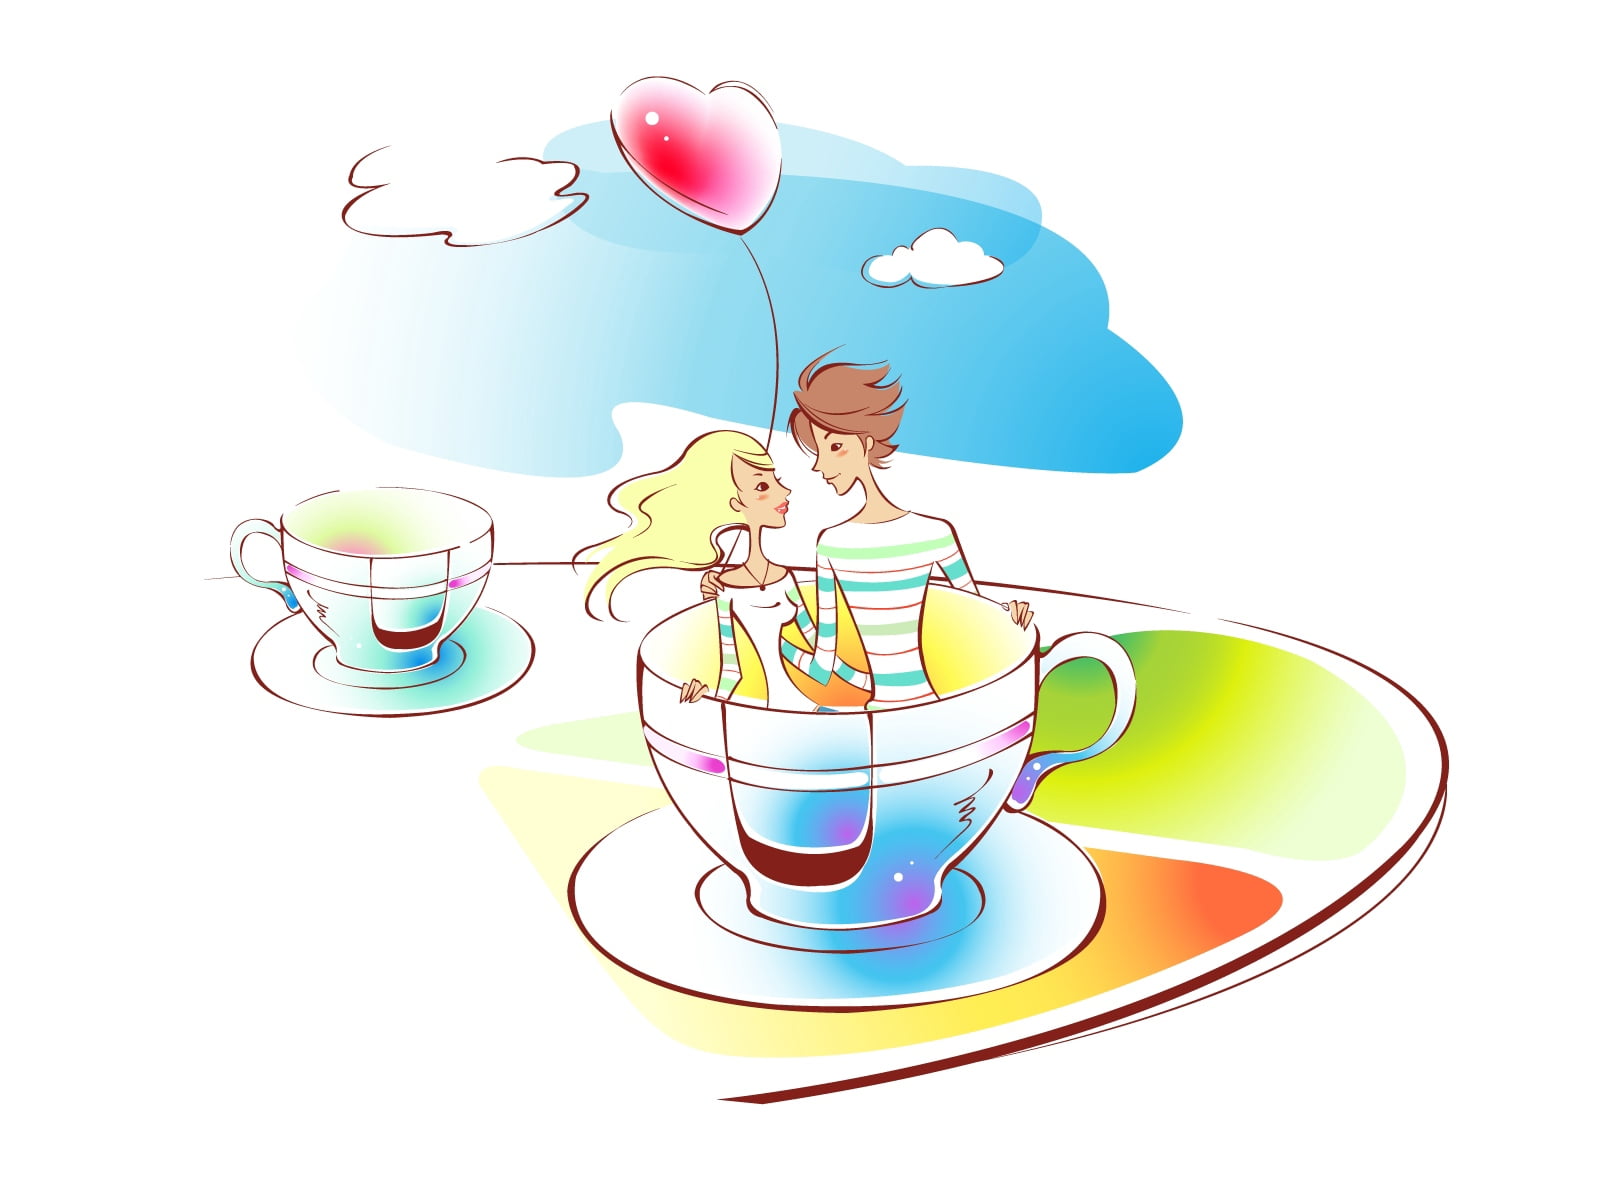 man and woman in cup illustration, couple, art, drawing, love